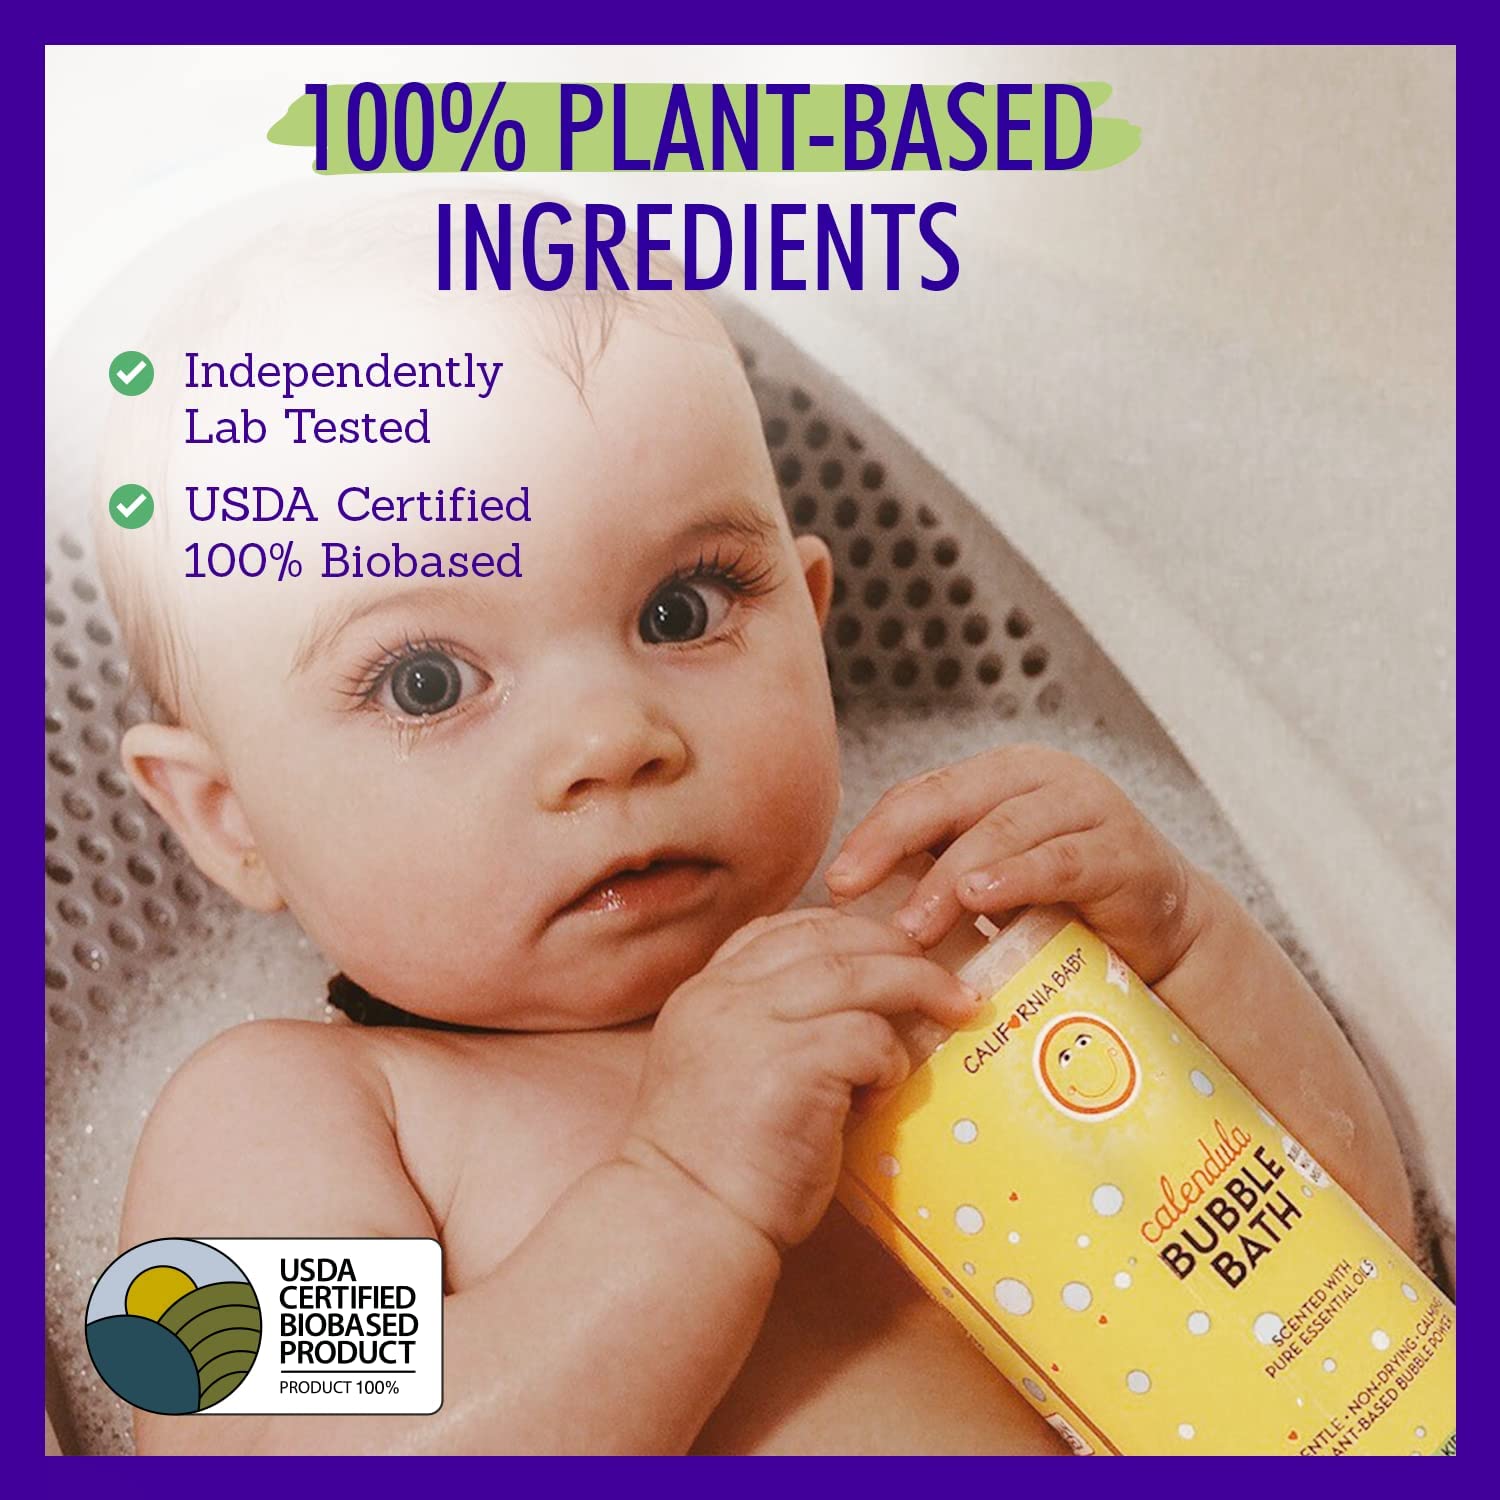 California Baby Calendula Bubble Bath | Calming Lavender Scent | 100% Plant-Based Ingredients (USDA Certified) | Allergy Friendly | Babies, Adults & Kids Bubble Bath | Ideal for Sensitive Skin | Free Bubble Wand Included | 384 mL / 13 fl. oz.